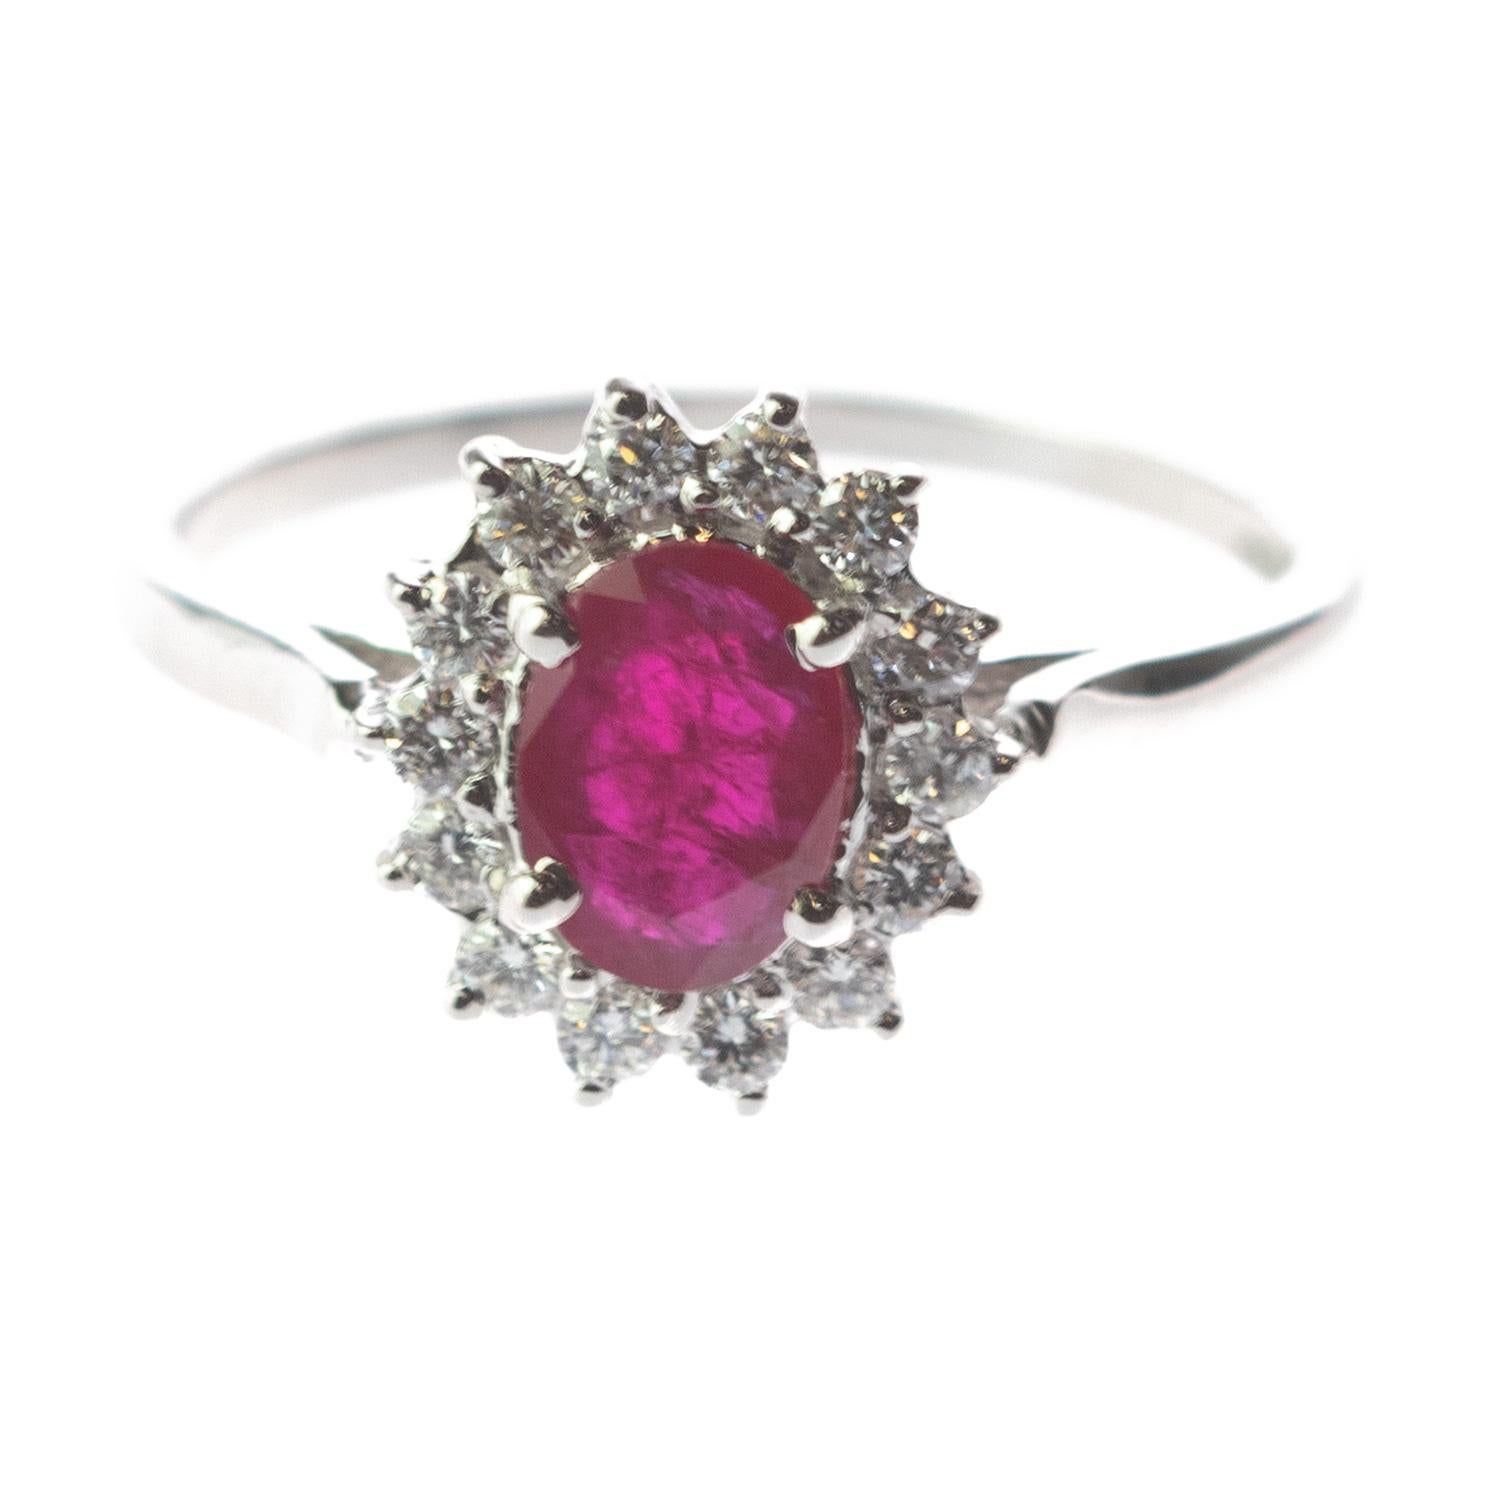 A stunning oval faceted Ruby ring enhanced by 18 karat white gold with diamonds. These epic jewellery pieces are an outstanding display of quality and Italian handmade royal craftsmanship. Create a fashionable look full of light and desire. This